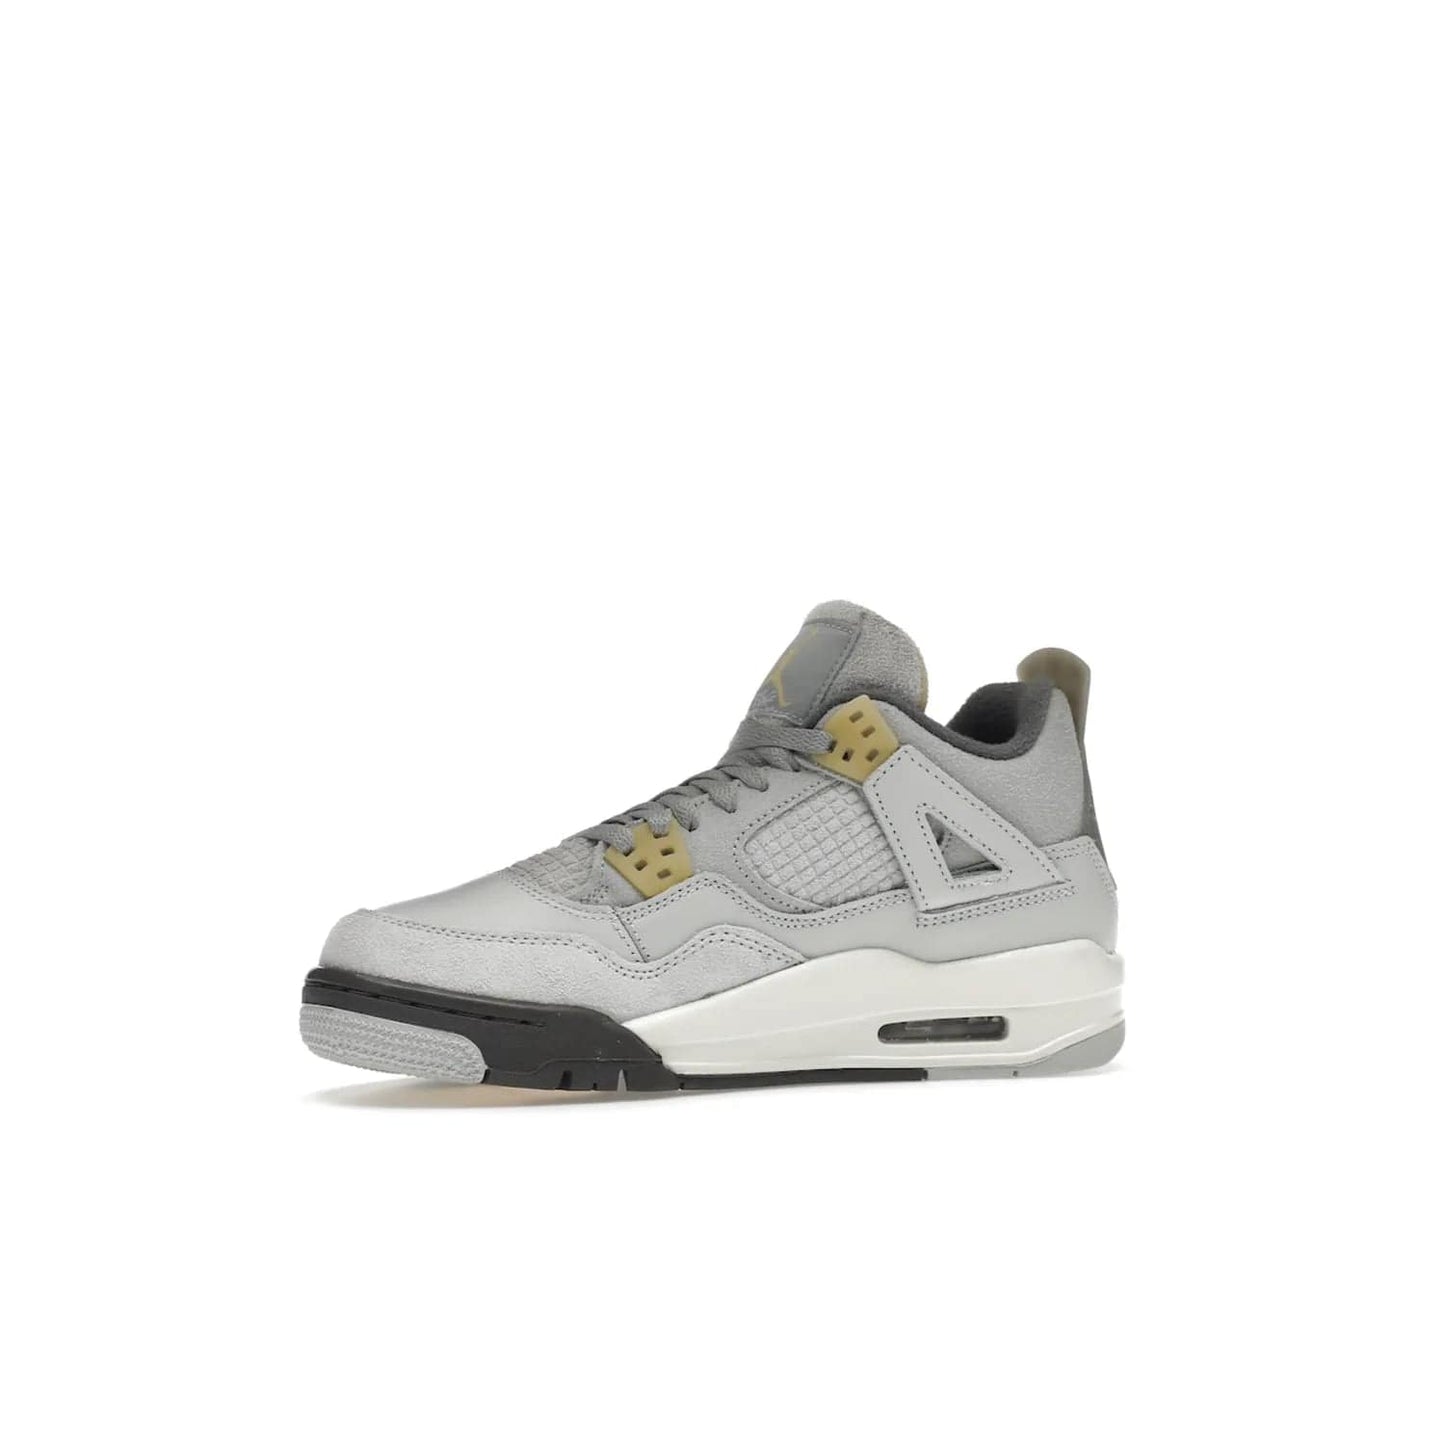 Jordan 4 Retro SE Craft Photon Dust (GS) - Image 17 - Only at www.BallersClubKickz.com - Shop the Jordan 4 Retro SE Craft Photon Dust (GS), the ultimate mix of style and comfort. With photonic dust, pale vanilla, off-white, grey fog, flat pewter and sail colorway, foam midsole, and rubber outsole, don't miss this special edition Jordan 4 releasing Feb 11, 2023.